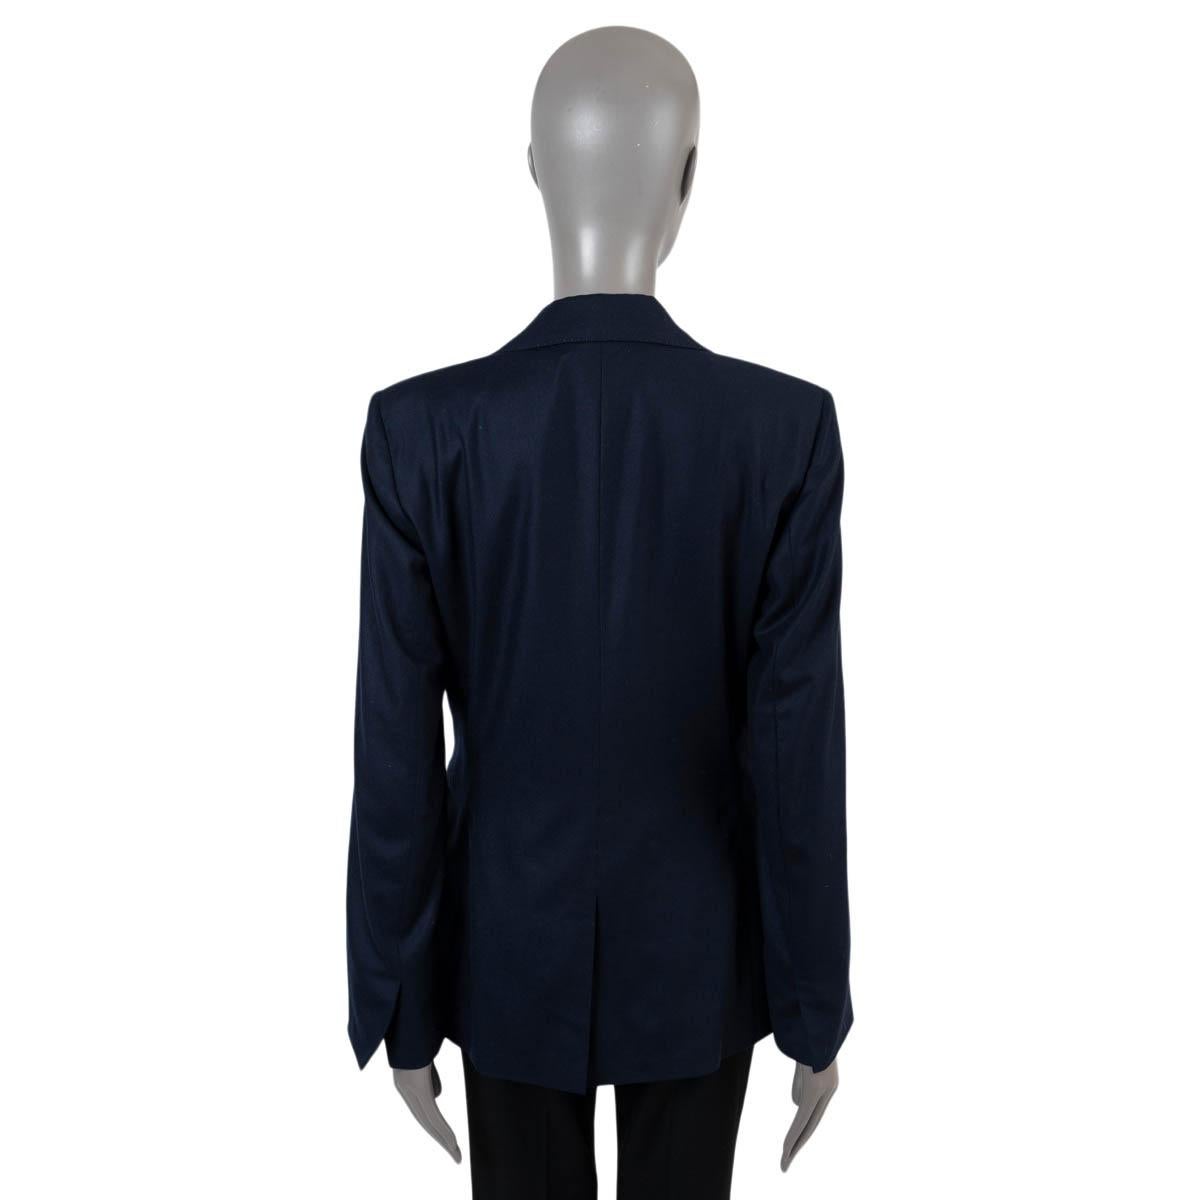 LORO PIANA navy blue cashmere TWO BUTTON Blazer Jacket 46 XL In Excellent Condition For Sale In Zürich, CH